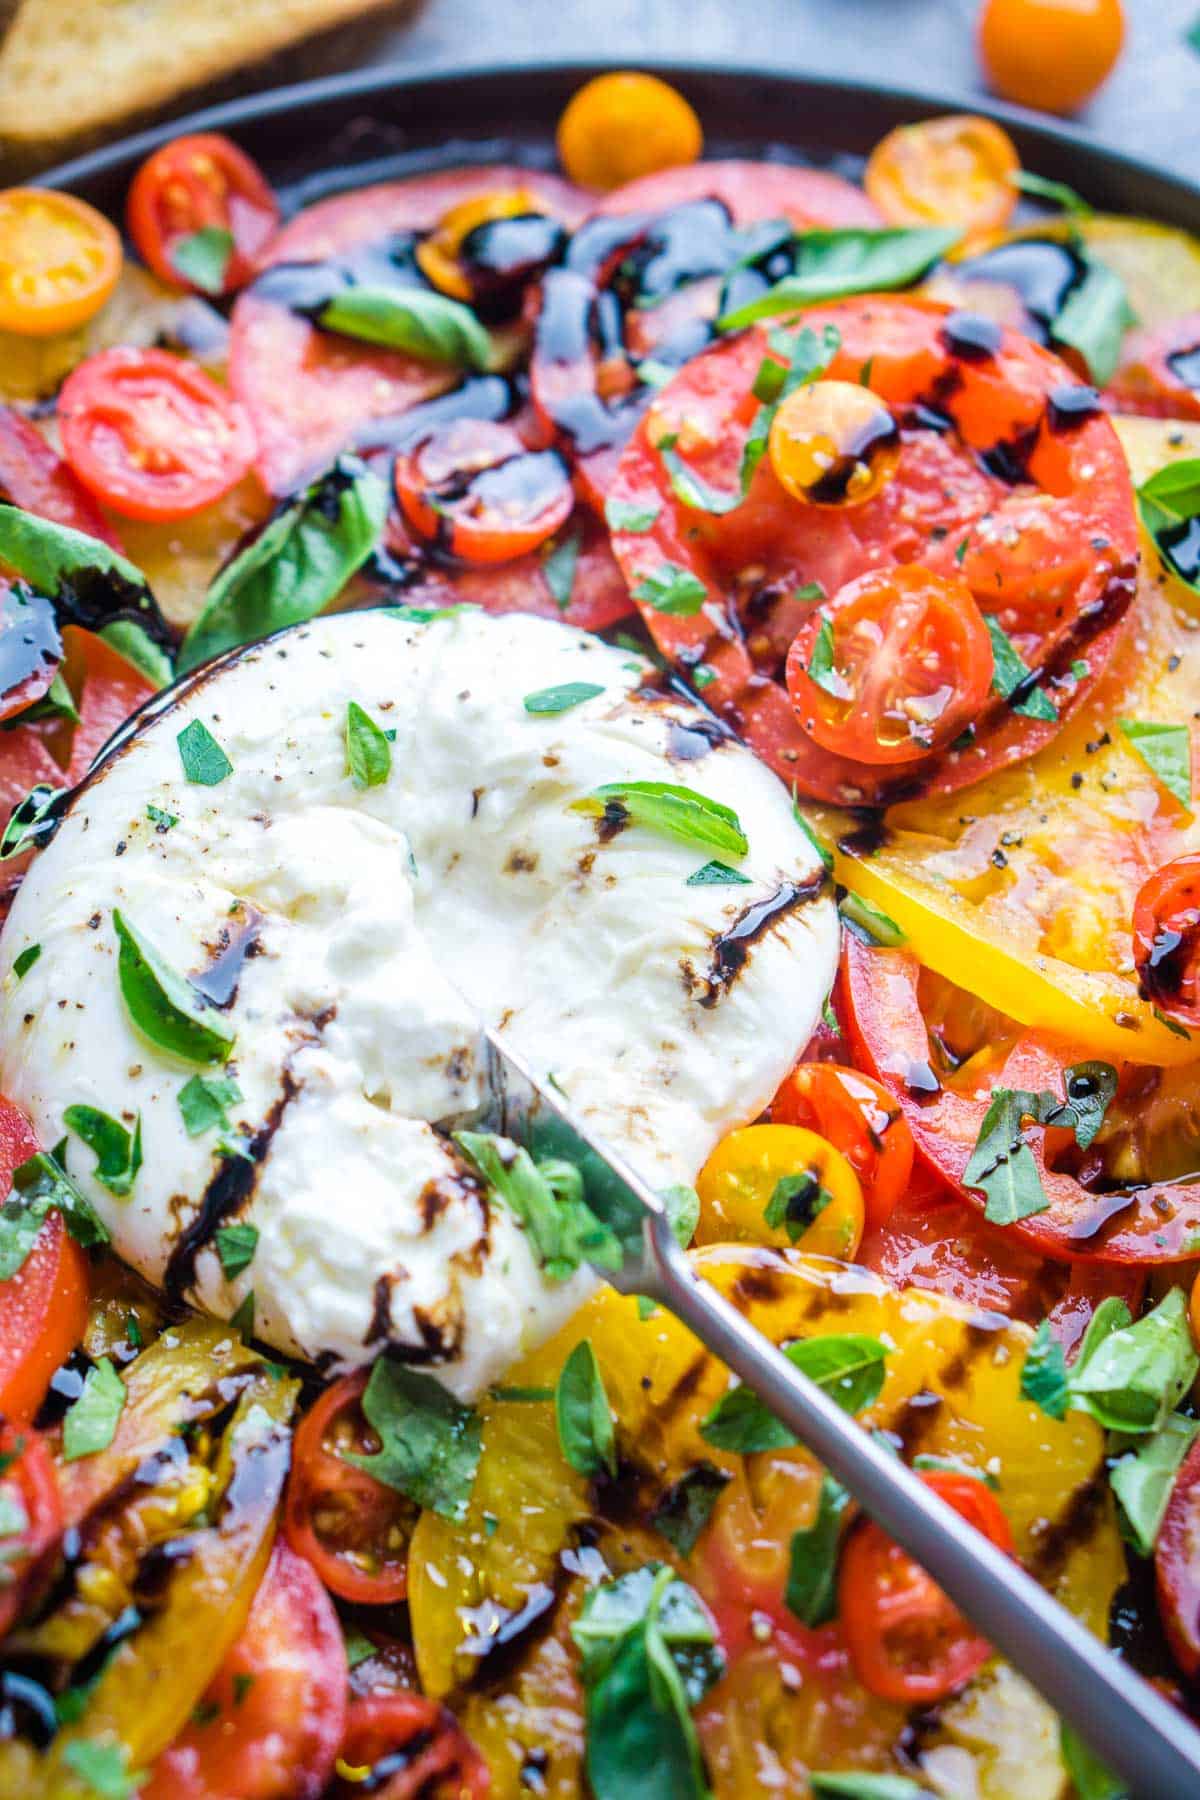 knife cuts into burrata cheese surrounded by tomatoes on gray plate